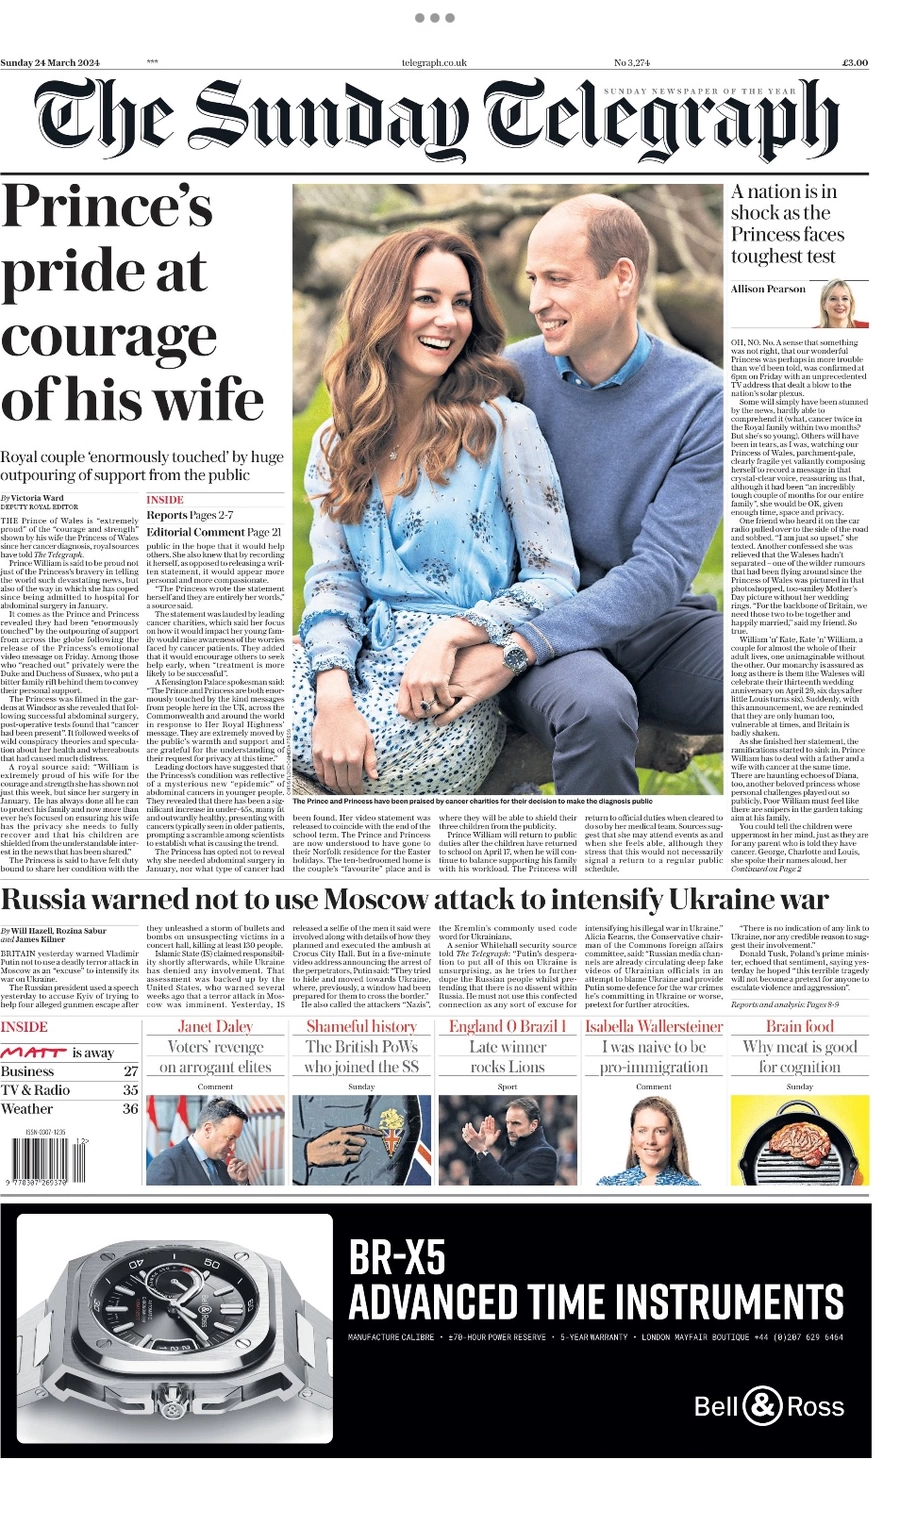 The Sunday Telegraph – Prince’s pride at courage of his wife